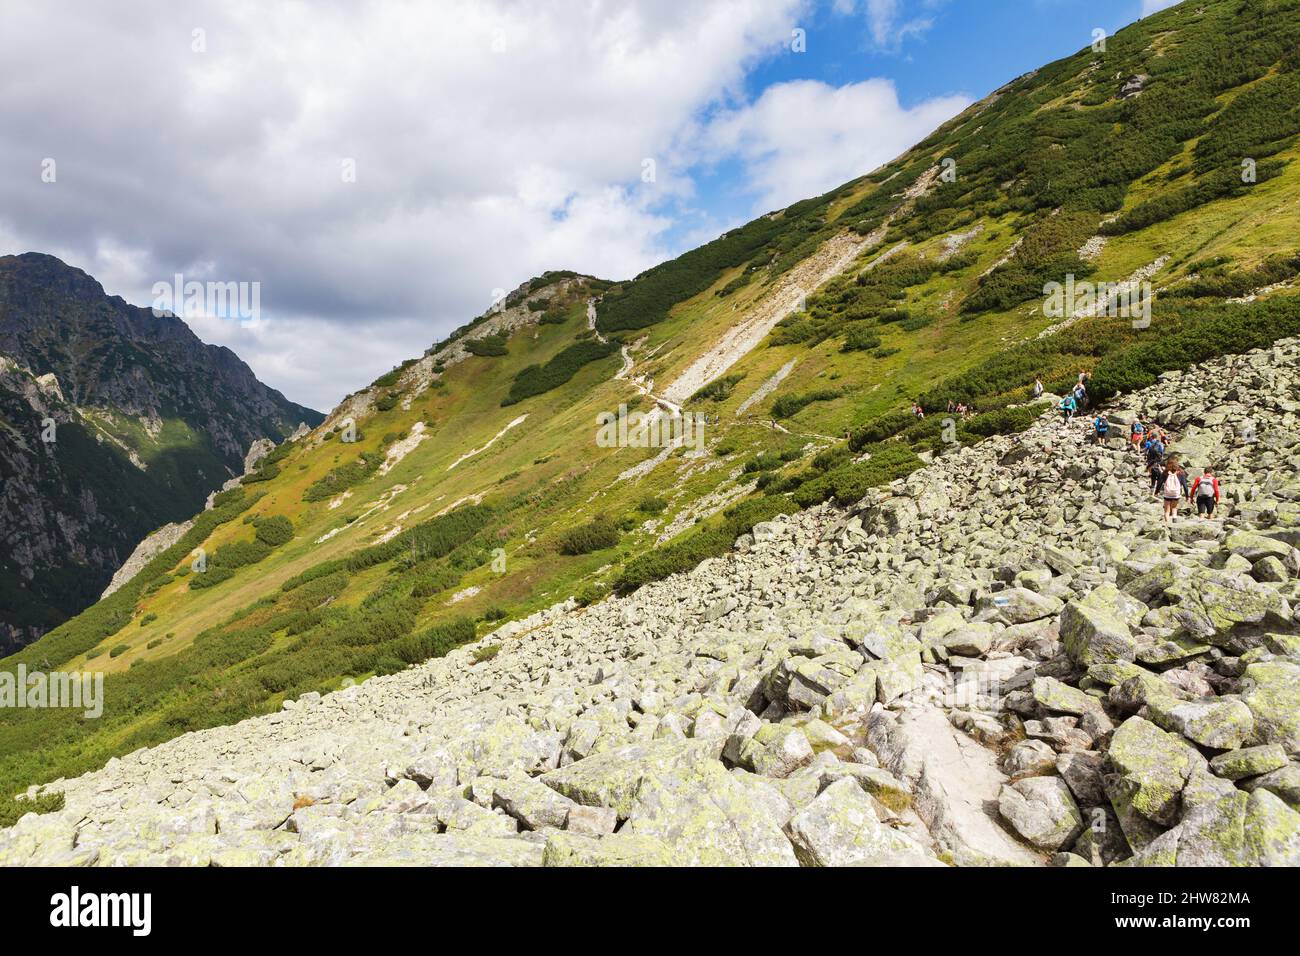 Tourists hiking in Tatra Mountains under blue cloudy sky Stock Photo